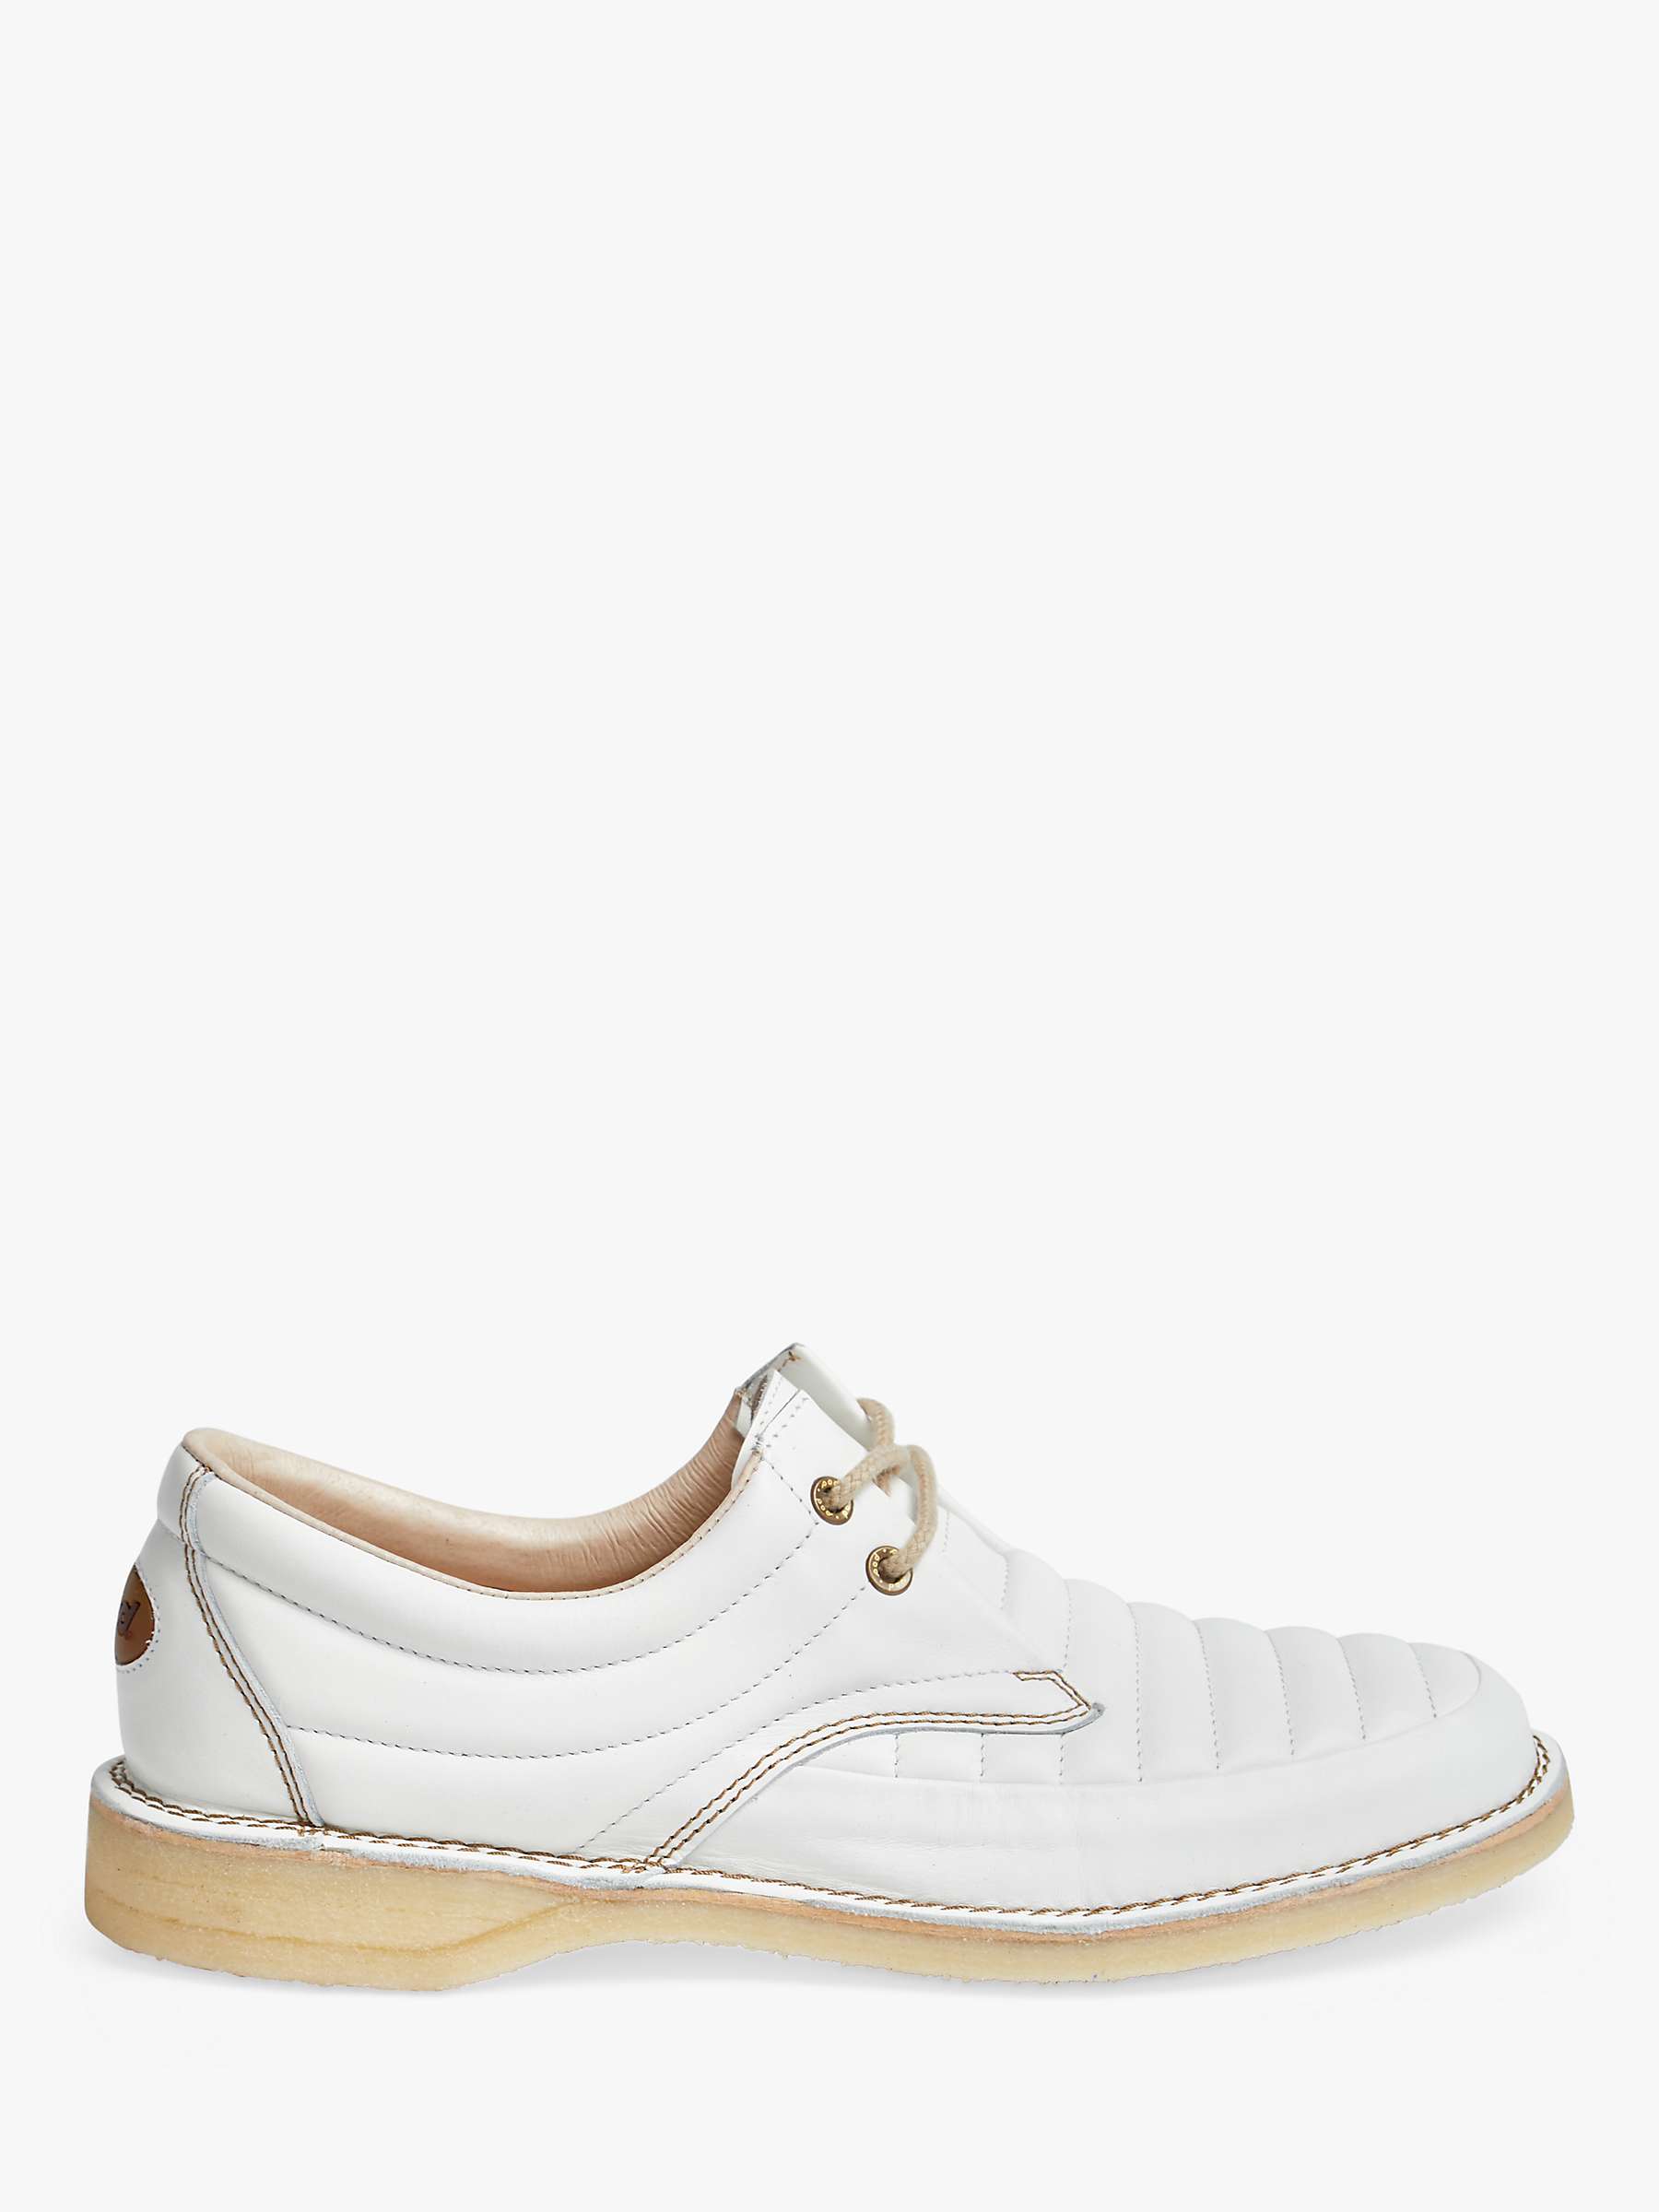 Pod Jagger Leather Lace Up Shoes, White at John Lewis & Partners